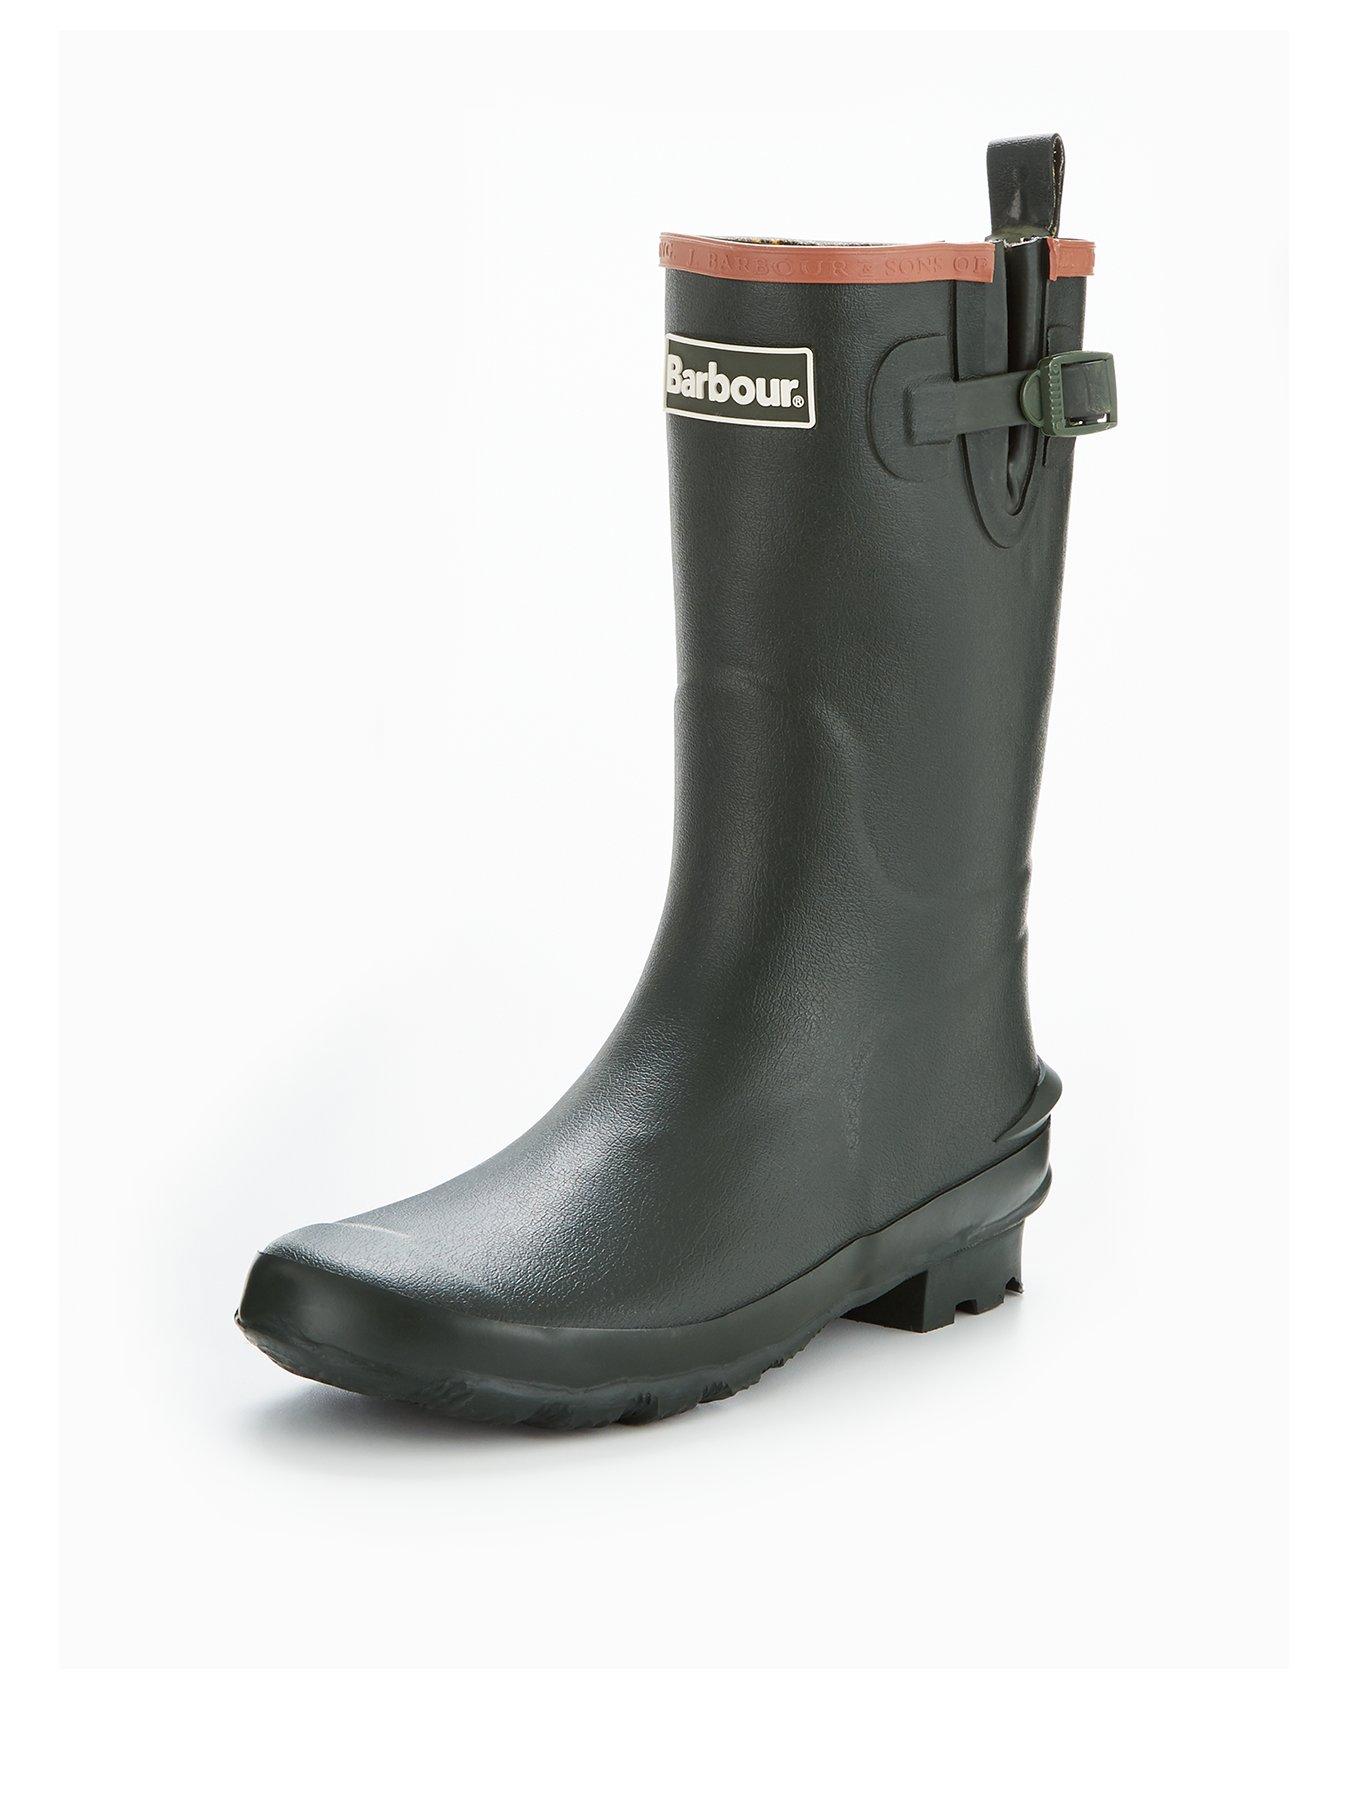 childrens barbour wellies